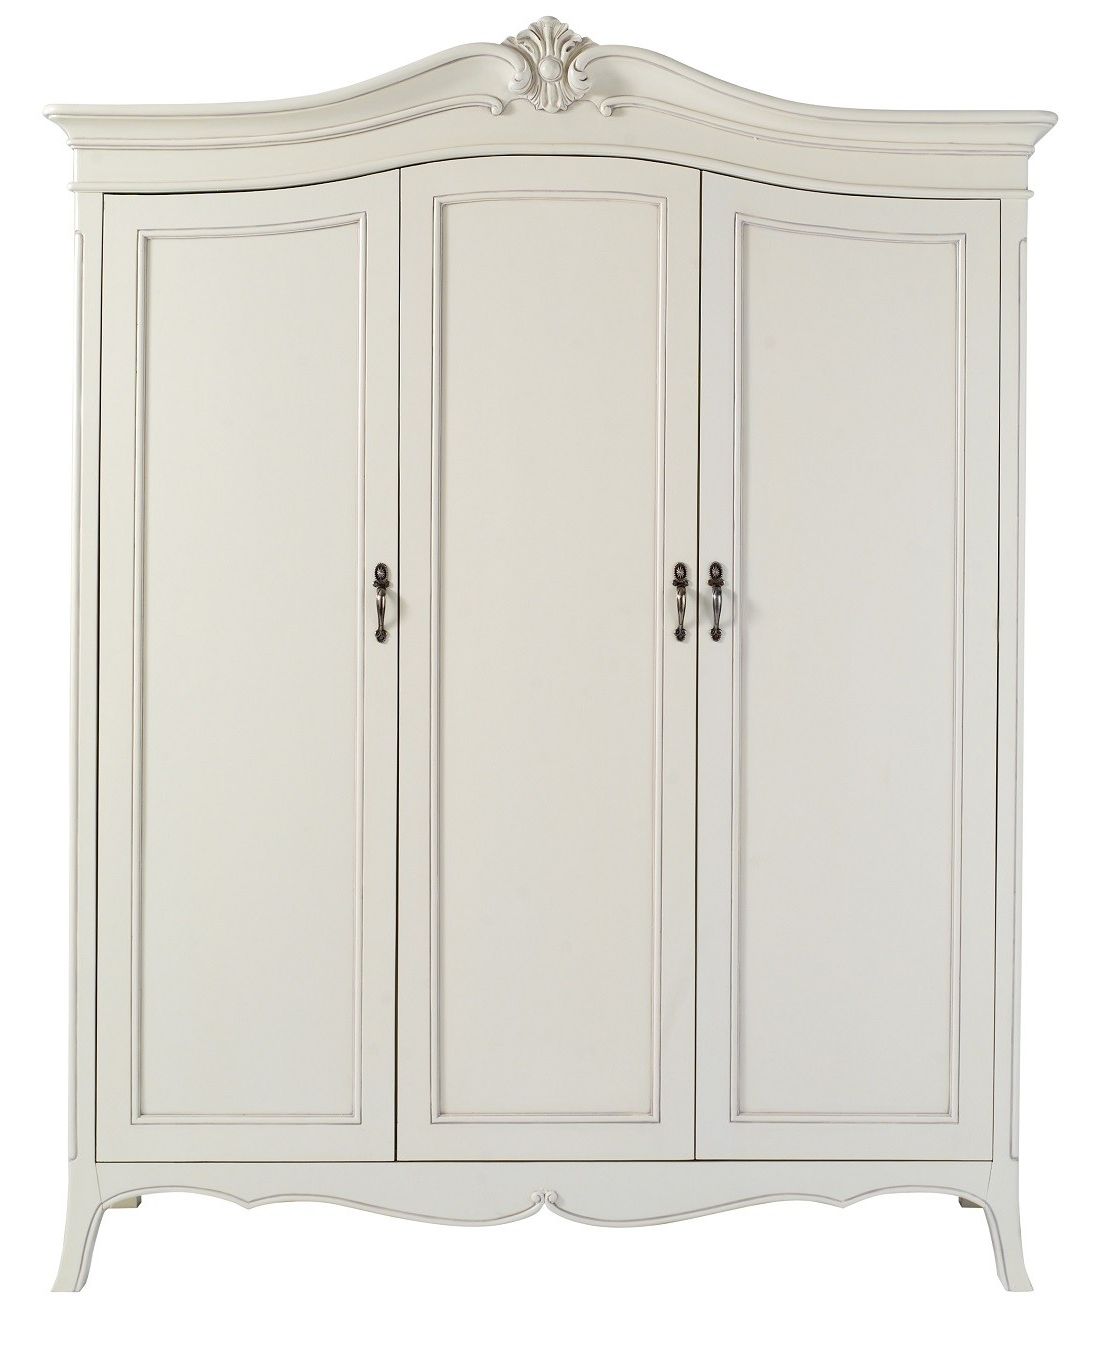 Painted Triple Wardrobes Throughout Widely Used Louis French Ivory Painted 3 Door Triple Wardrobe (View 2 of 15)